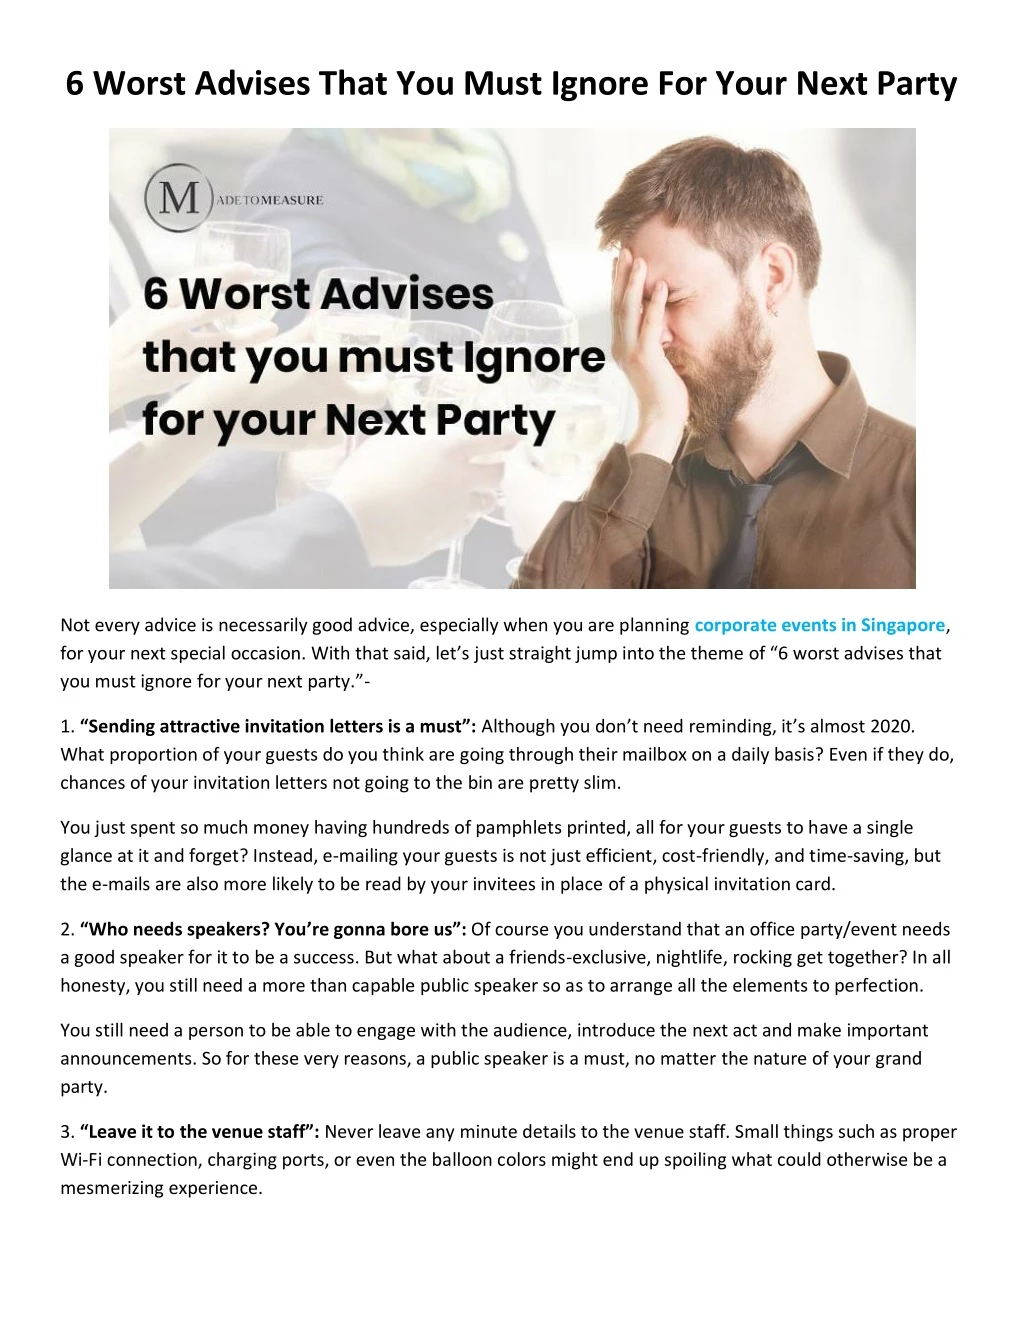 6 worst advises that you must ignore for your